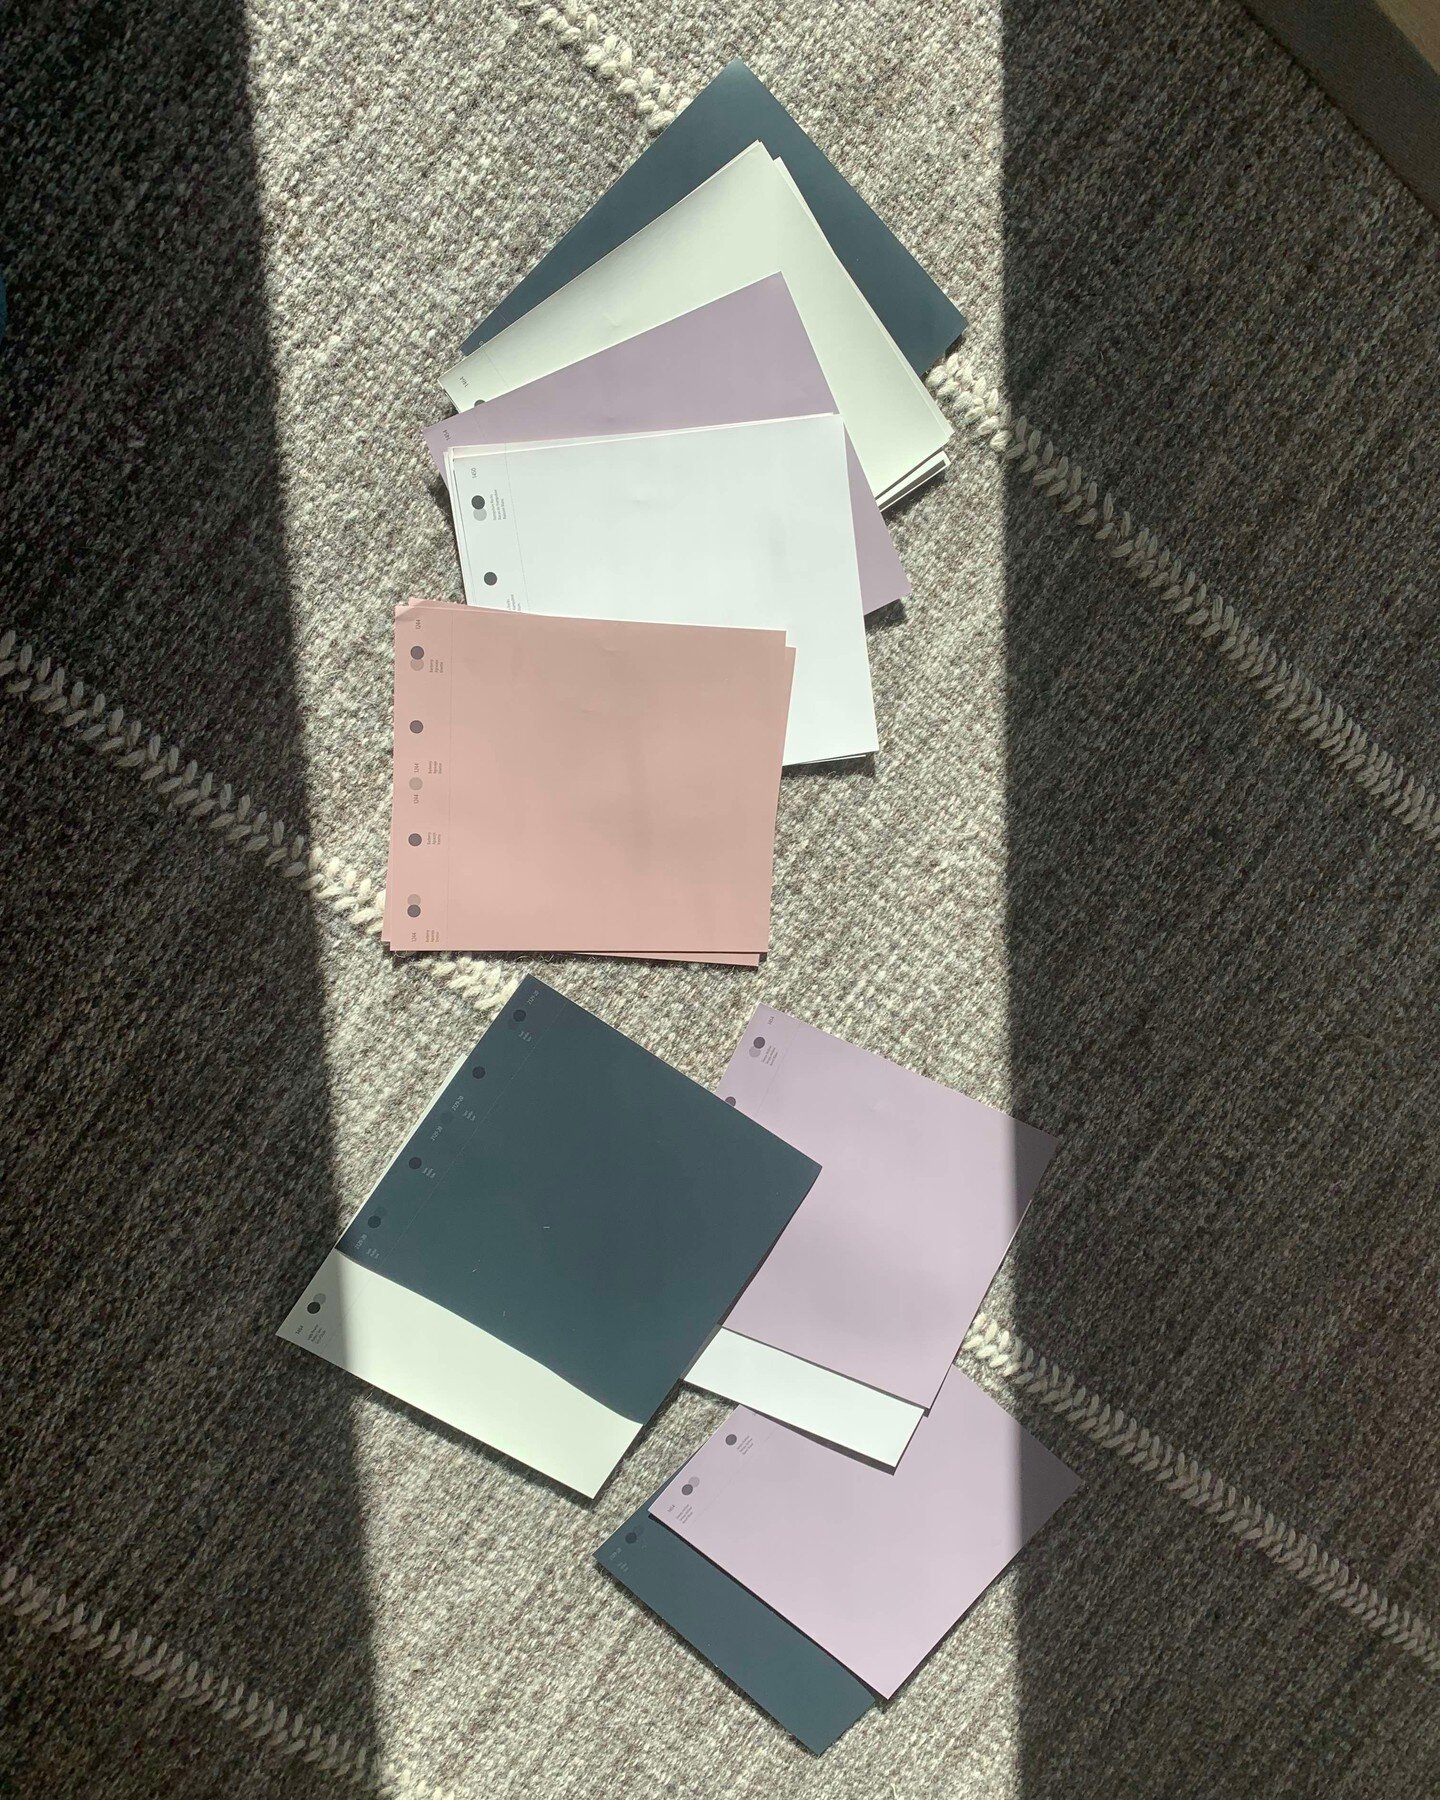 Black, white, pink, and purple for the interior and exterior of our new building. Painting starts soon and we can't wait for the transformation to happen!⁣
⁣
⁣
#dorothyparkerdesign⁣
.⁣
.⁣
#durangocolorado⁣
#durango⁣
#coloradolife⁣
#durangosustainable